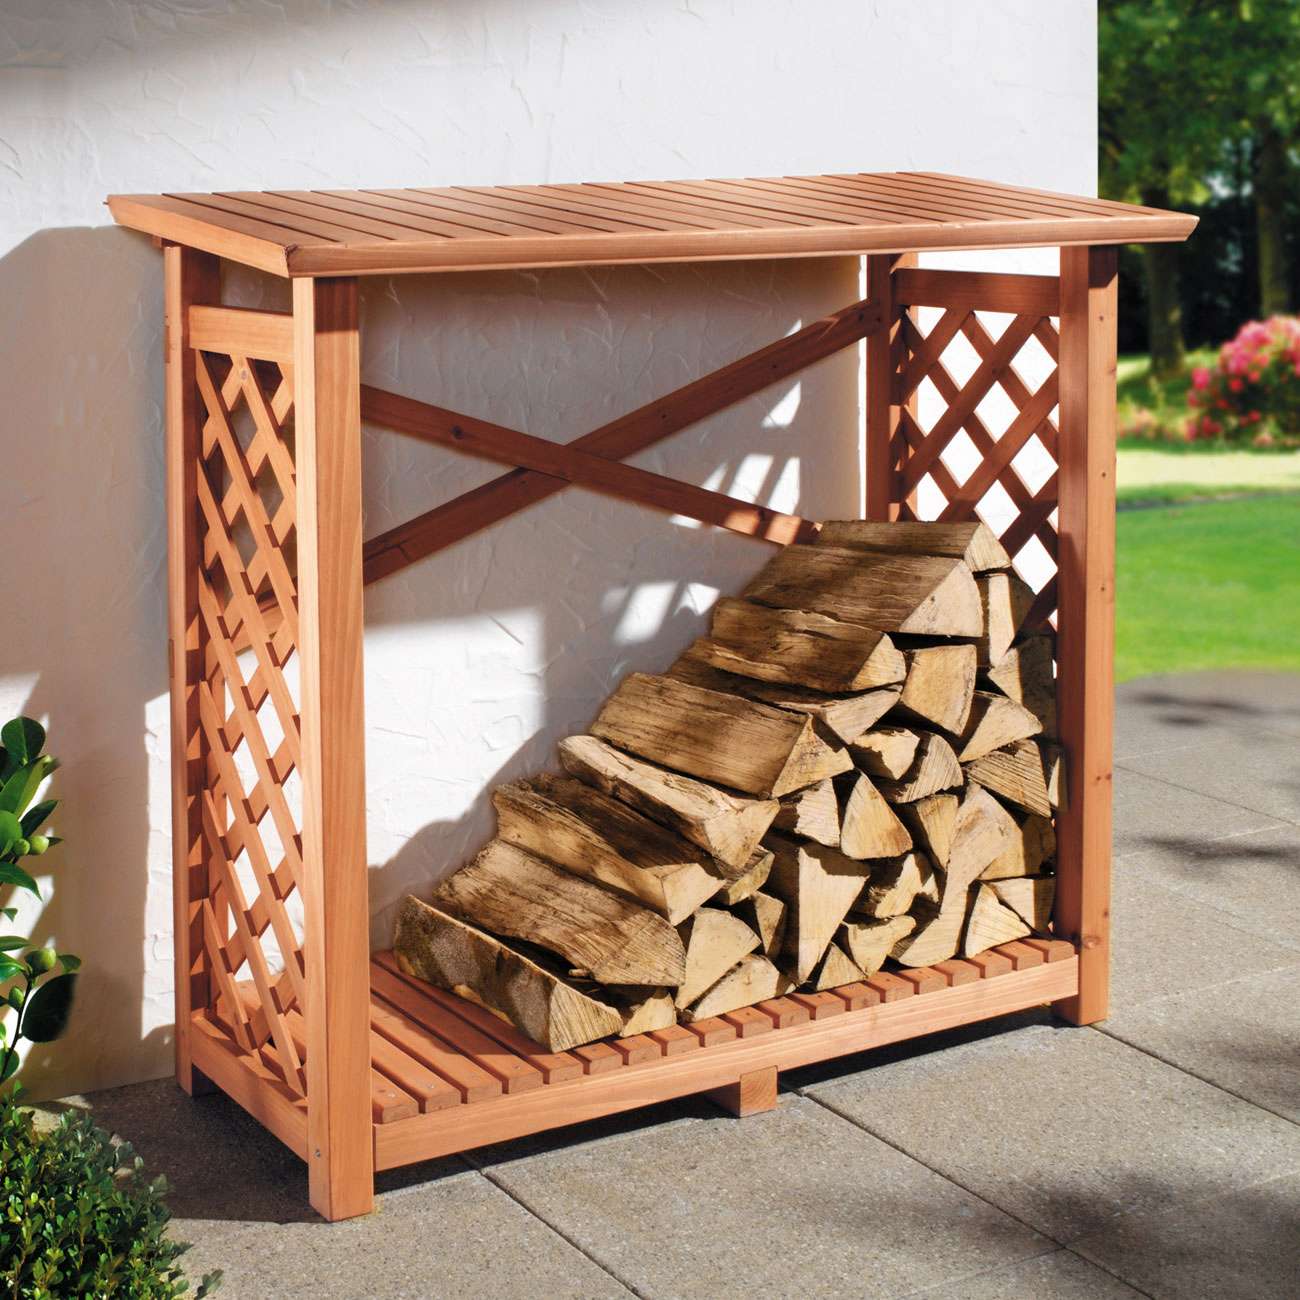 6 Best DIY Firewood Rack Plans That You Can Build Easily 